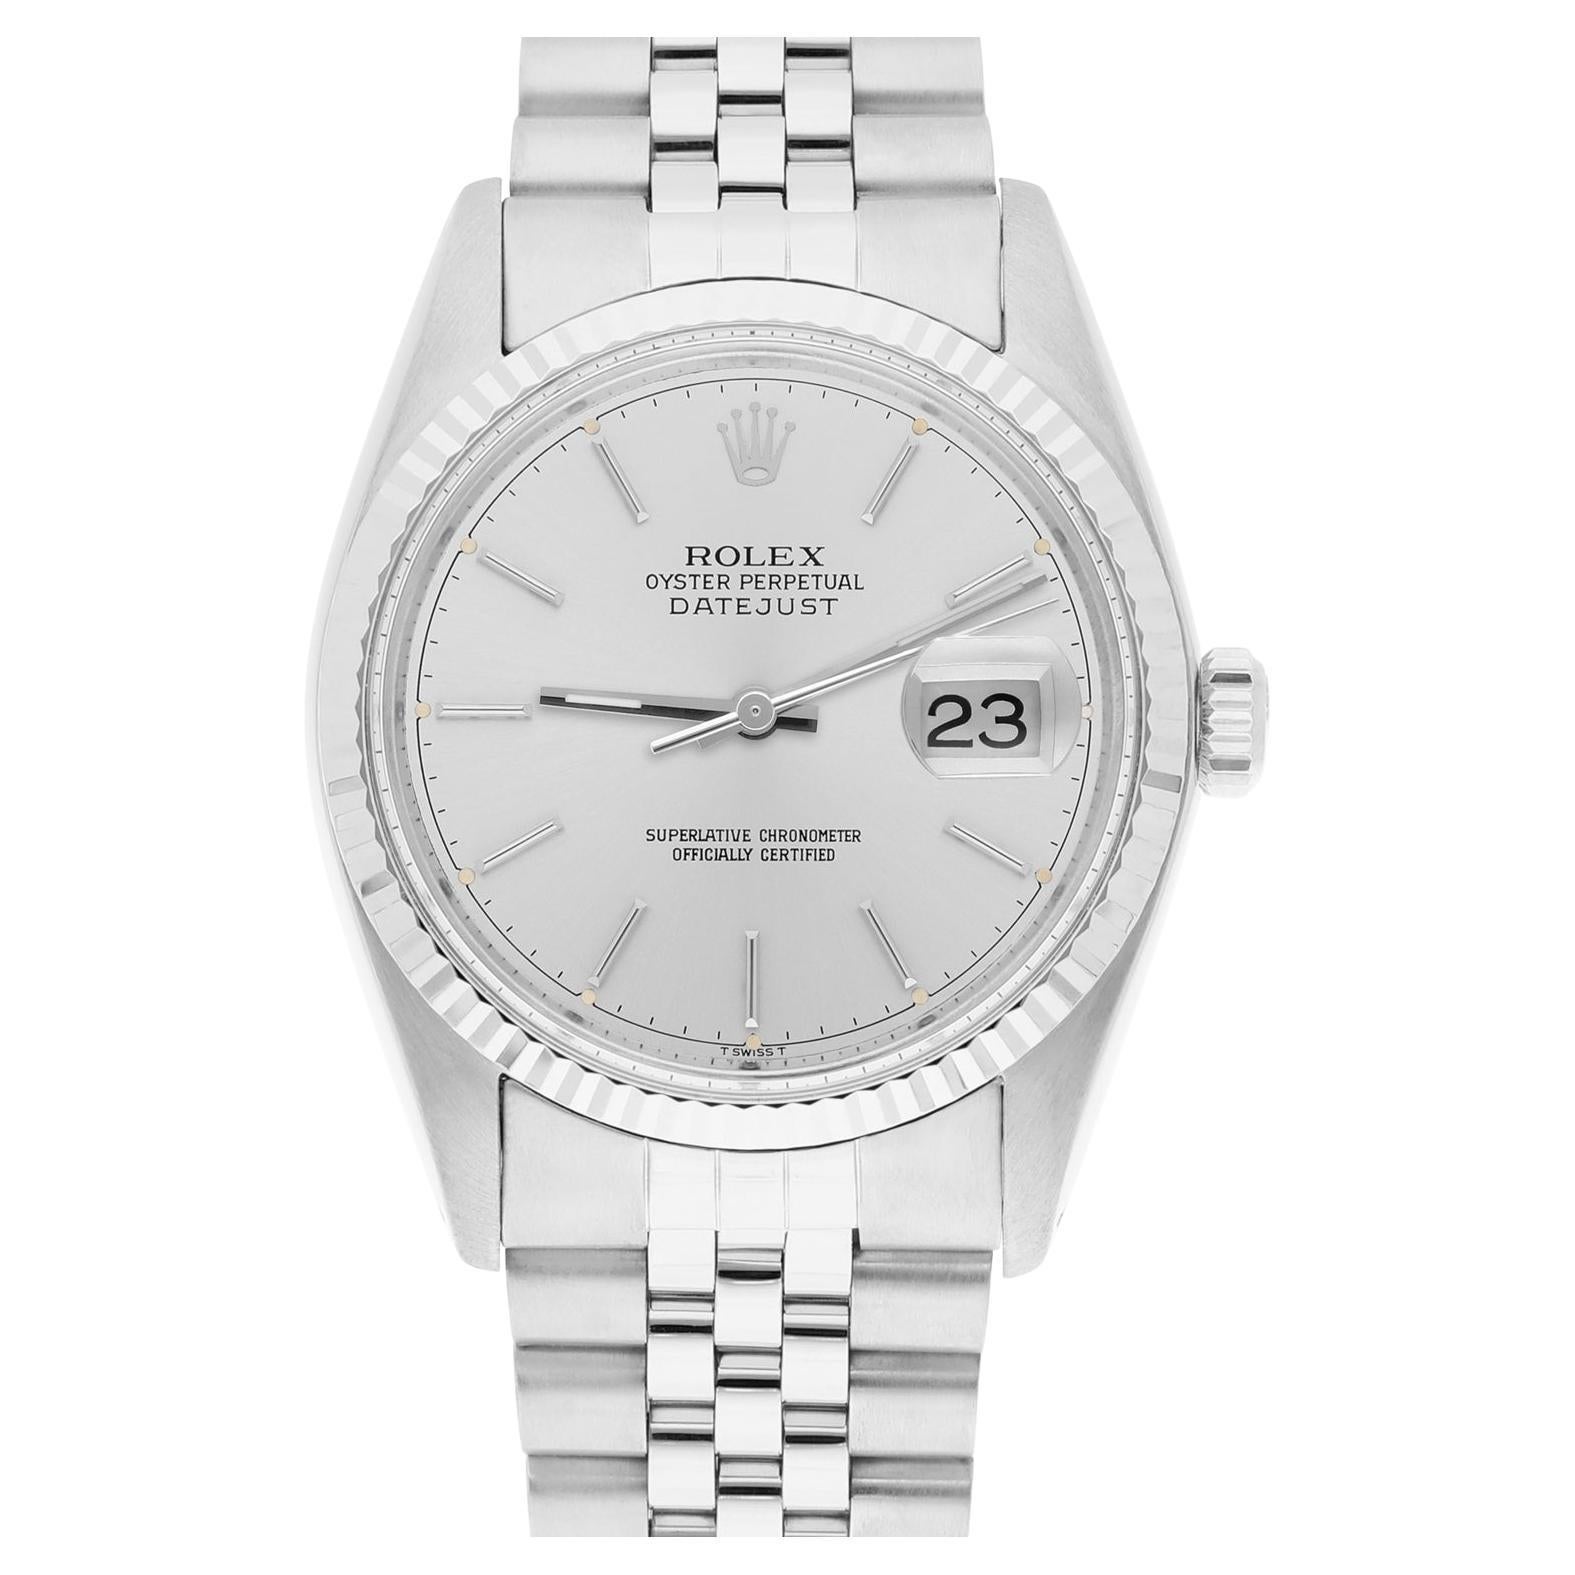 Rolex Datejust 36mm Stainless Steel 16014 Silver Index Dial, Circa 1987 For Sale